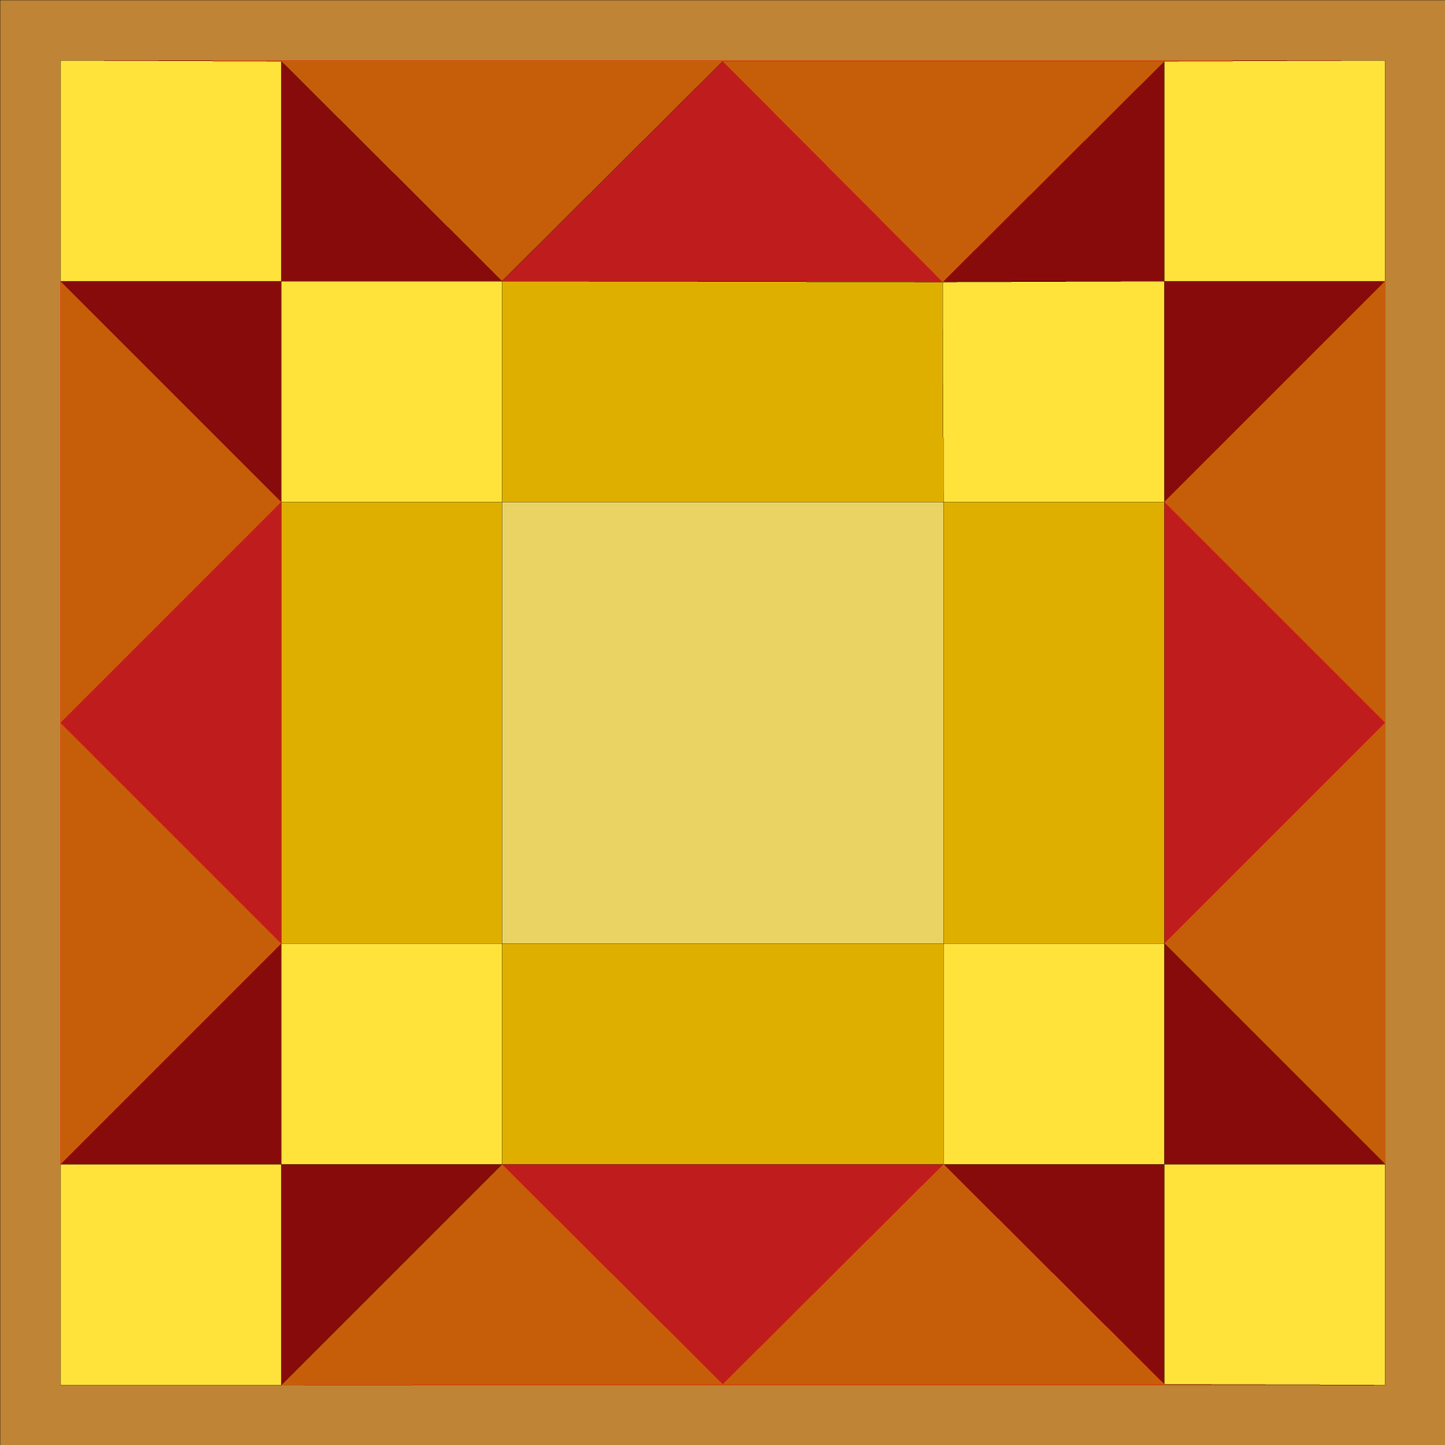 48x48" Sunset Barn Quilt PDF Pattern, SVG Pattern, Wood quilt to paint for outdoors Bundle